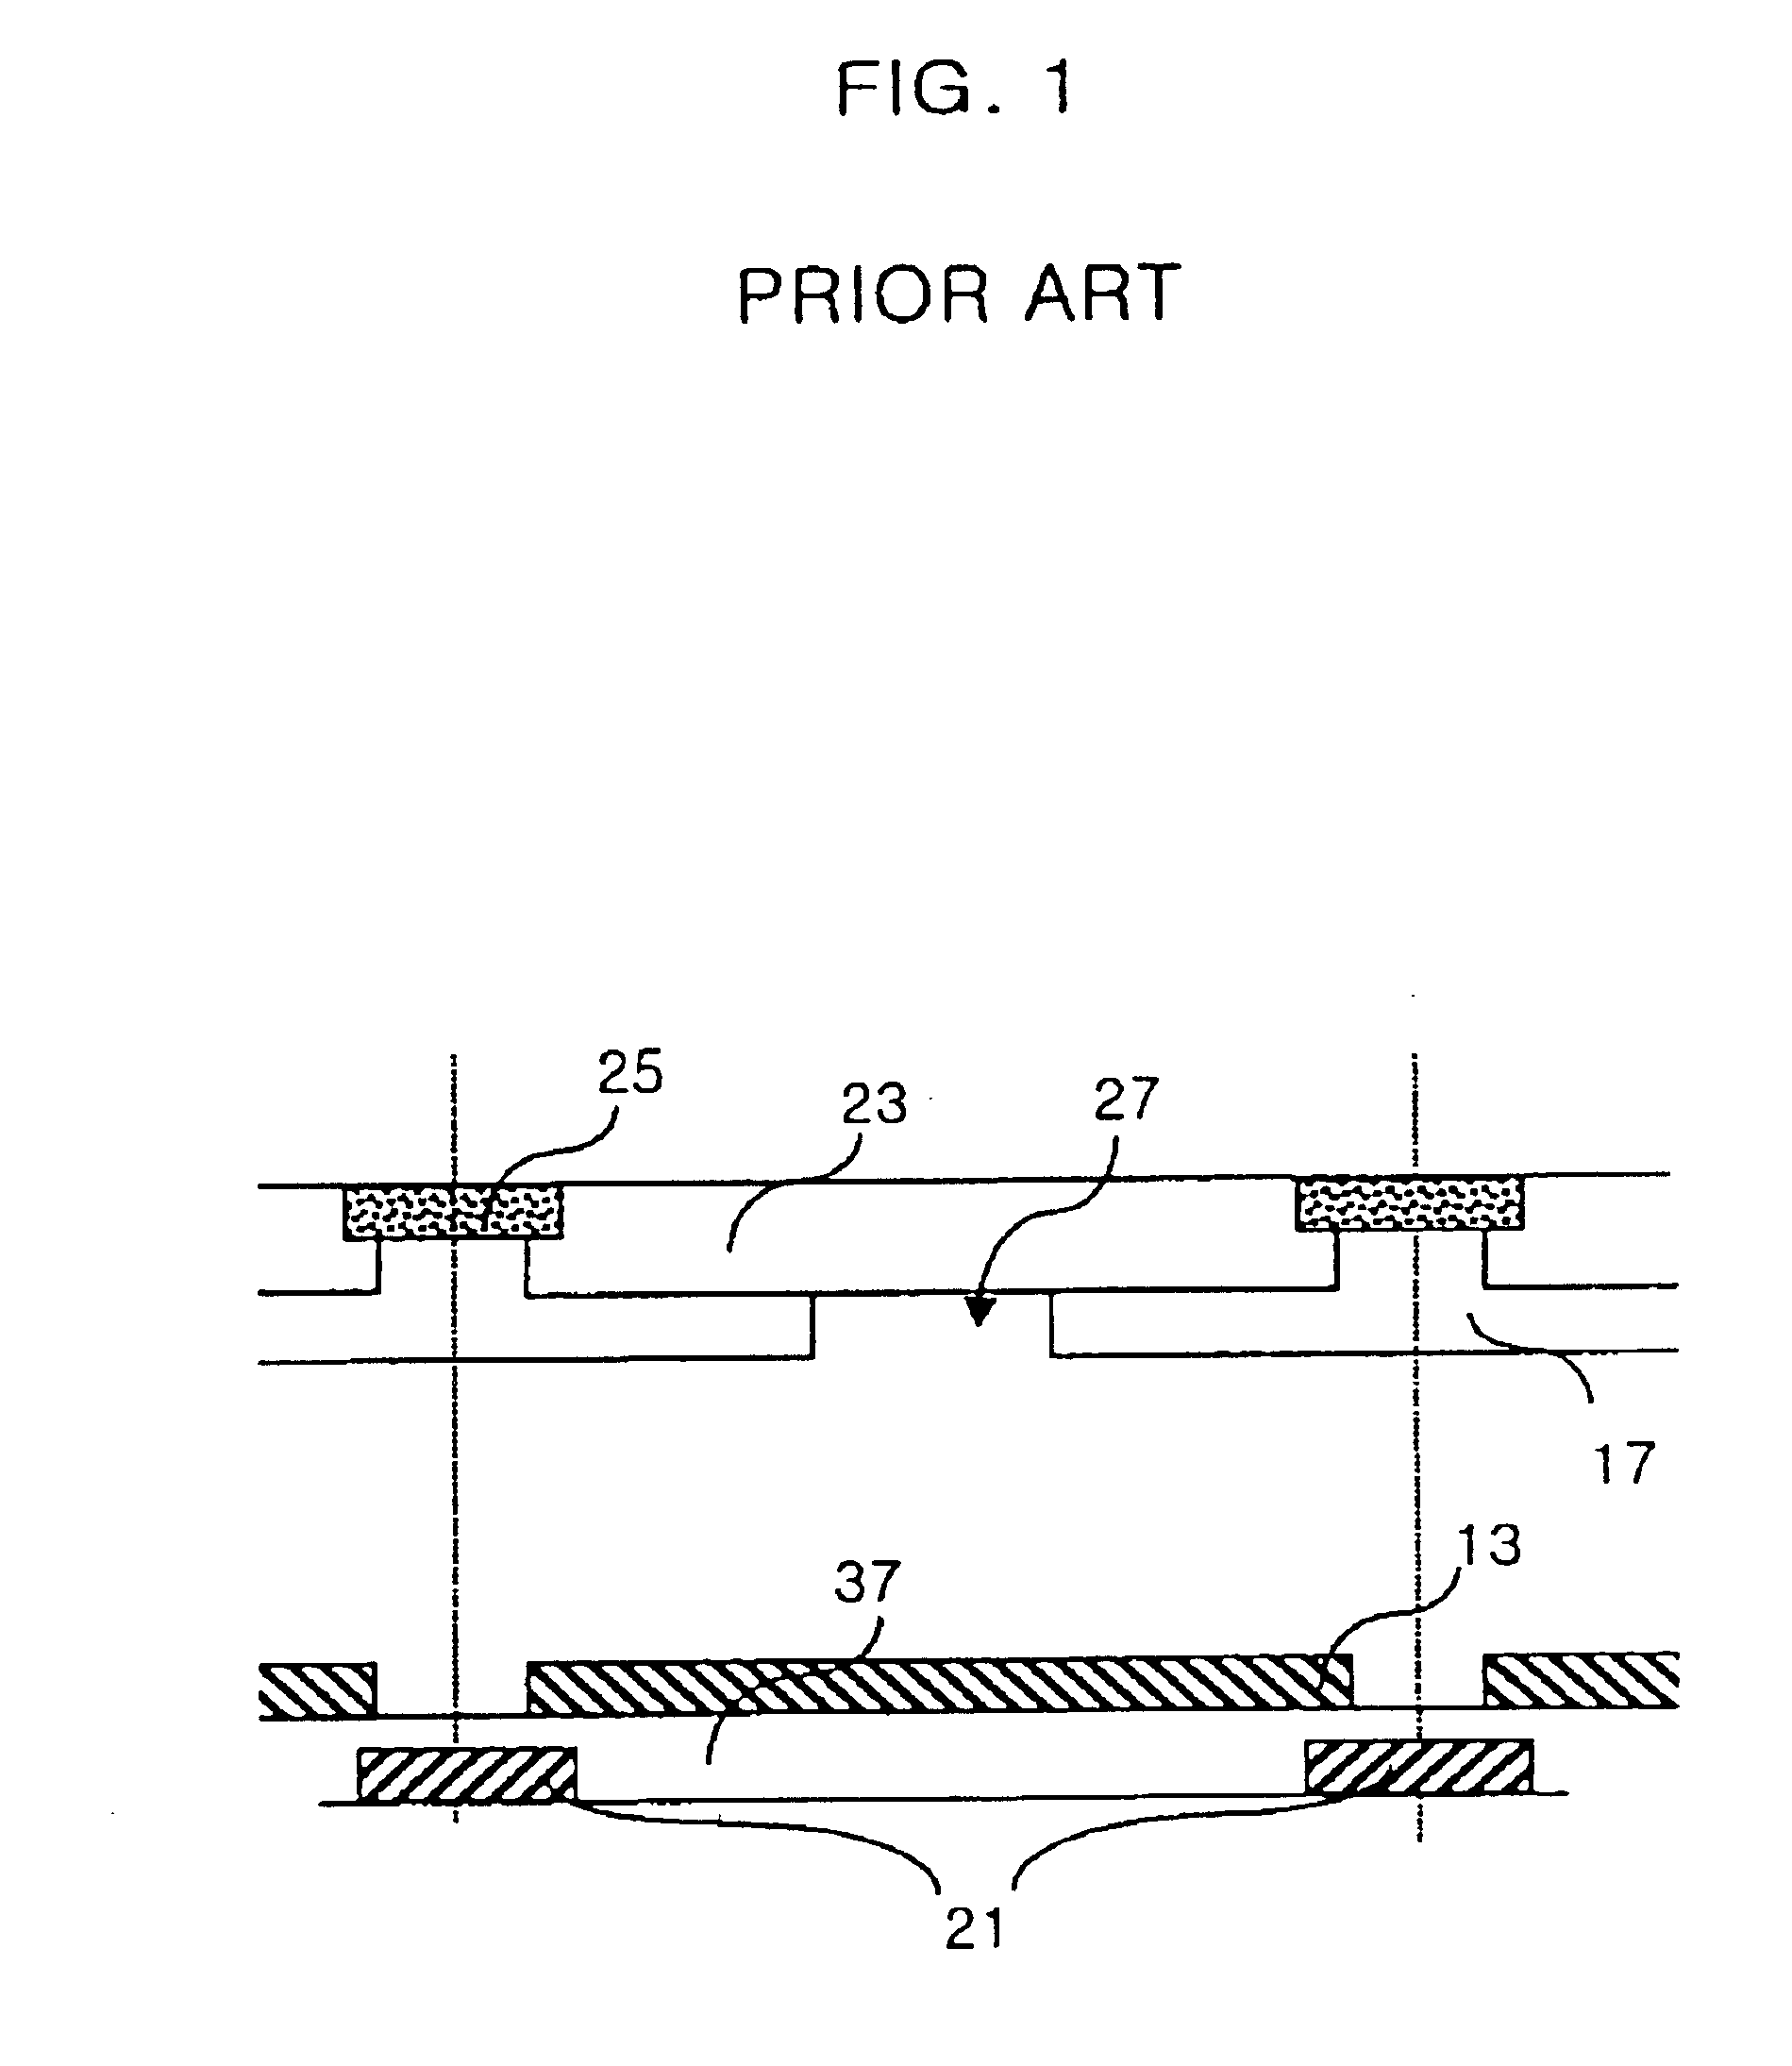 Multi-domain liquid crystal display device with particular dielectric structures